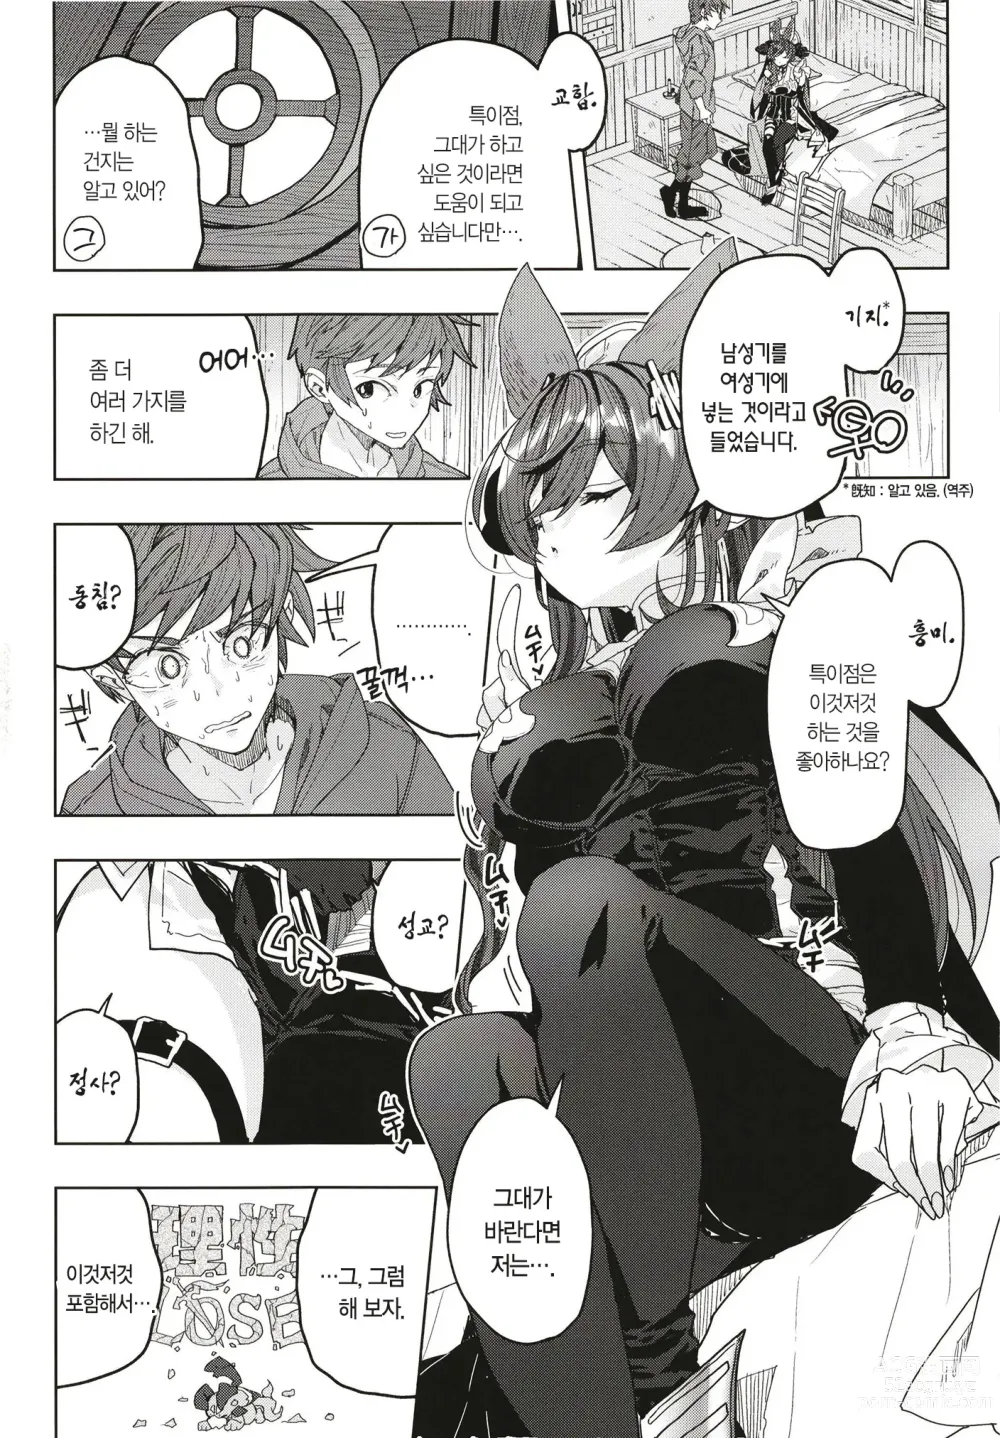 Page 8 of doujinshi 『금』의 축복